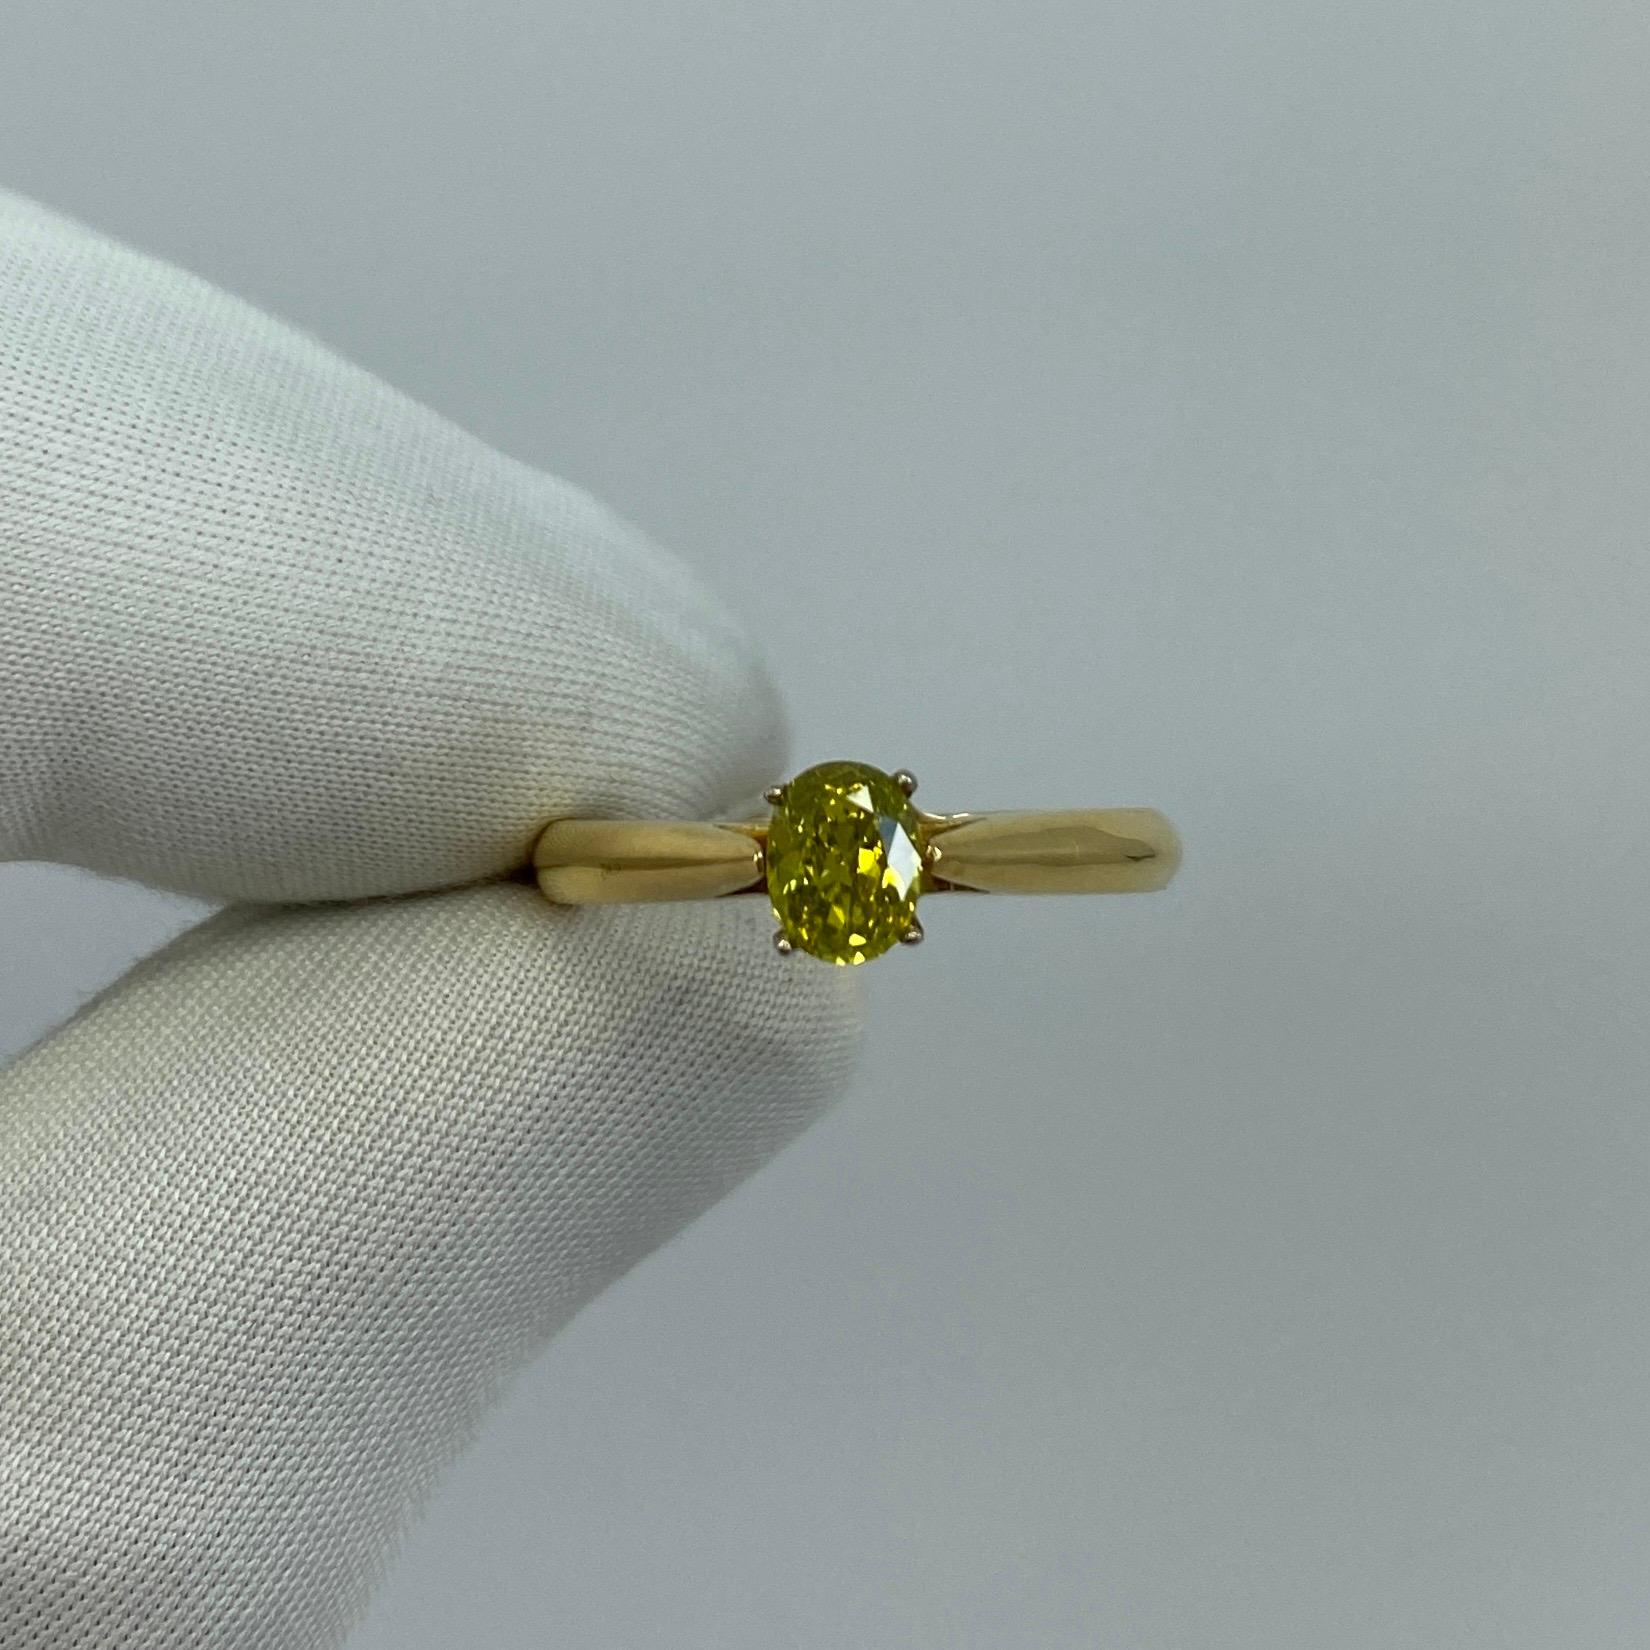 Fine Natural Fancy Yellowish Green Diamond 18k Gold Solitaire Ring. 

0.51 carat stone with a vivid fancy yellowish green colour and excellent VVS1 clarity. Very clean stone.

Yellow gold band with white gold claws to really show the stone to best